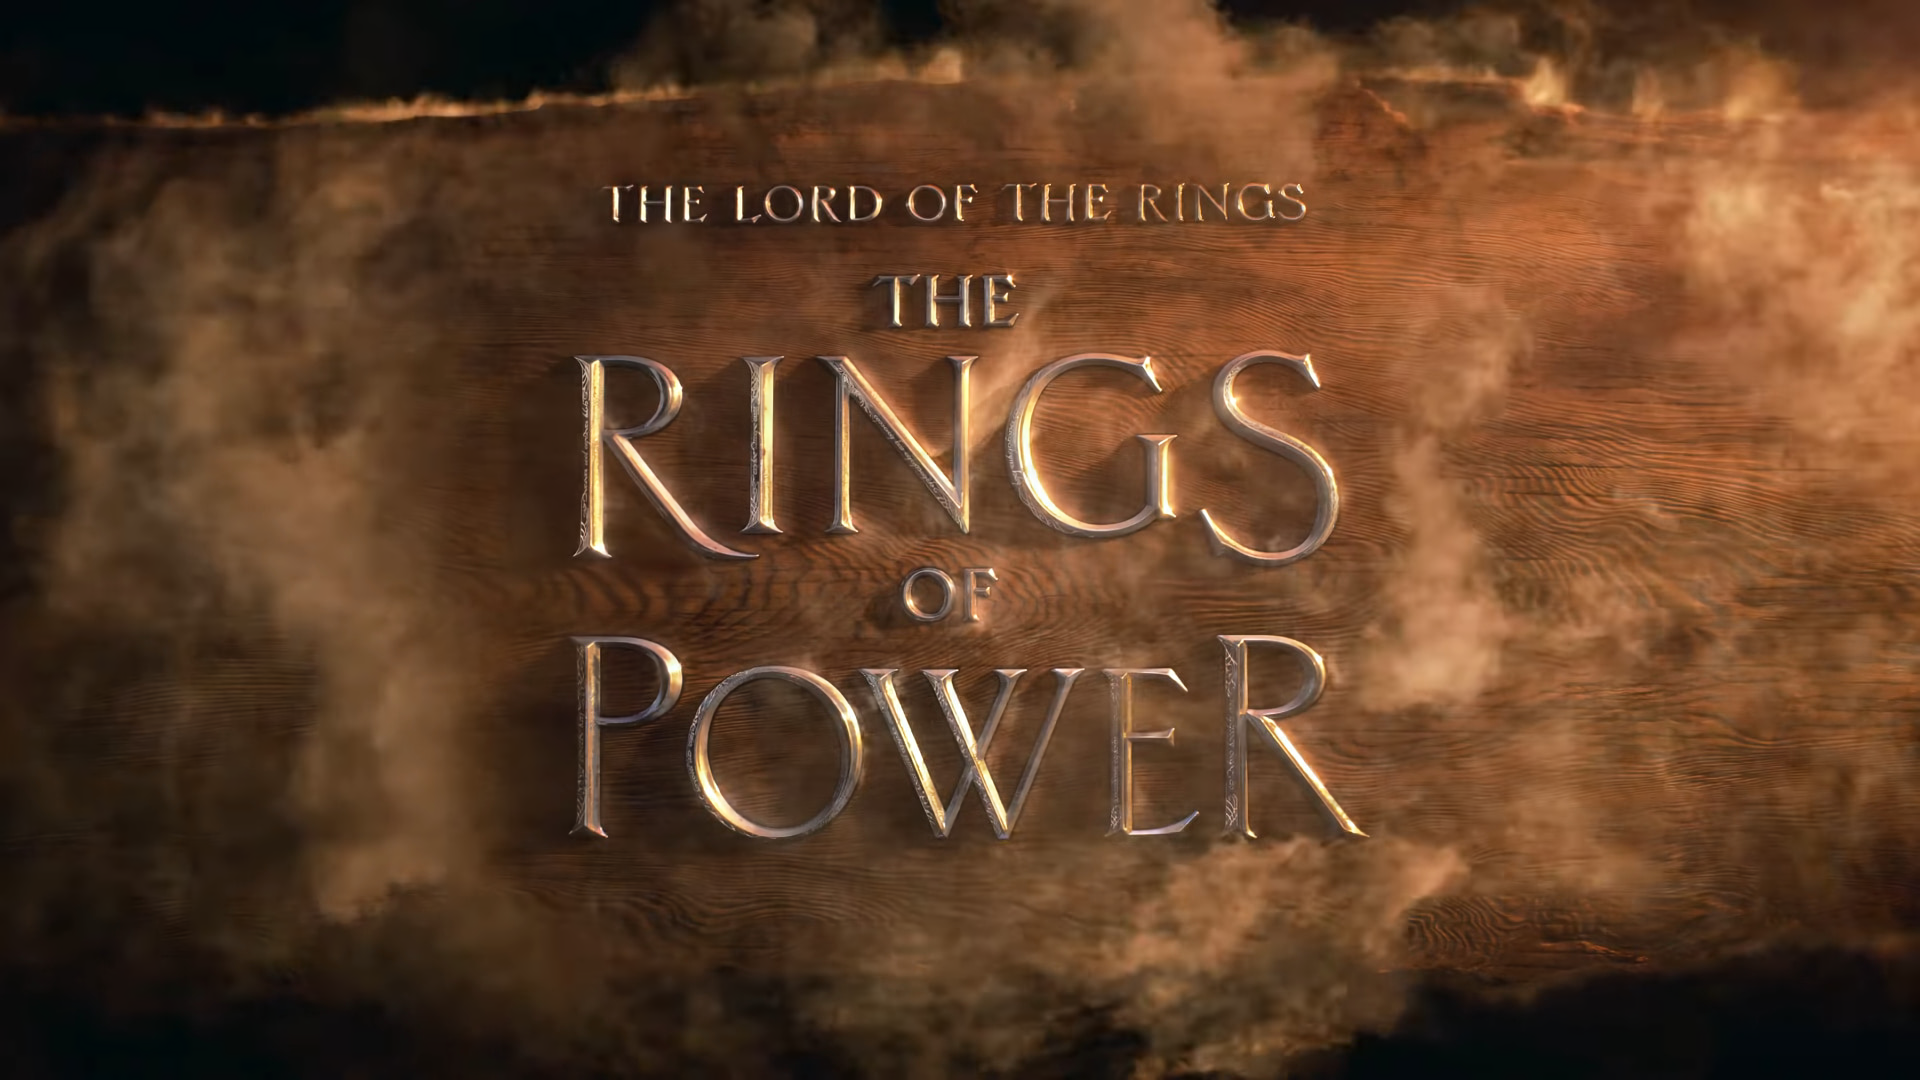 TV Show The Lord of the Rings: The Rings of Power HD Wallpaper | Background Image